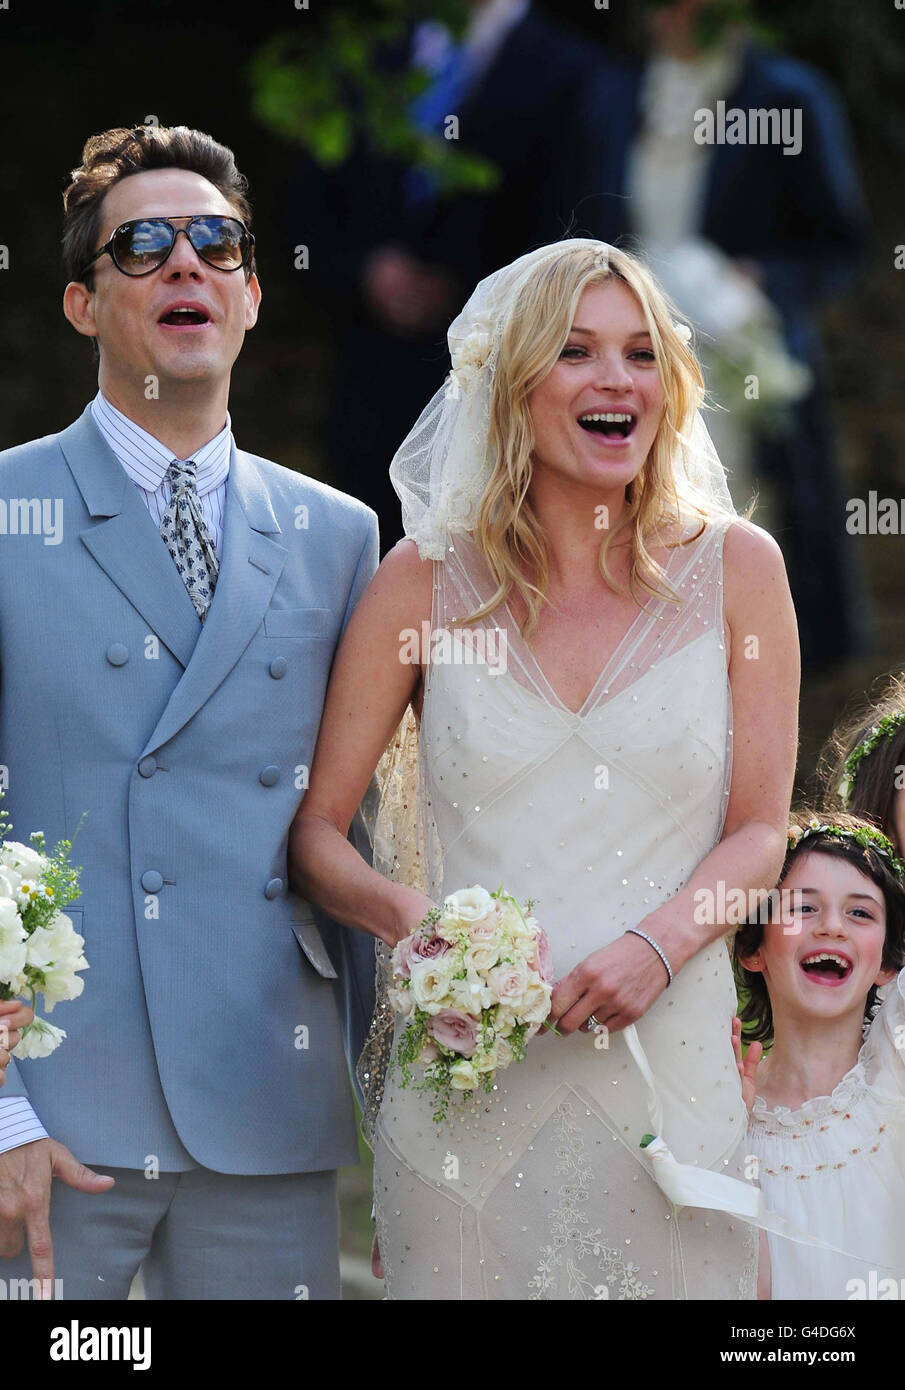 Kate Moss and Jamie Hince Wedding - Oxfordshire. Kate Moss with her new husband Jamie Hince (left) after their wedding at St Peter's Church in Southrop. Stock Photo